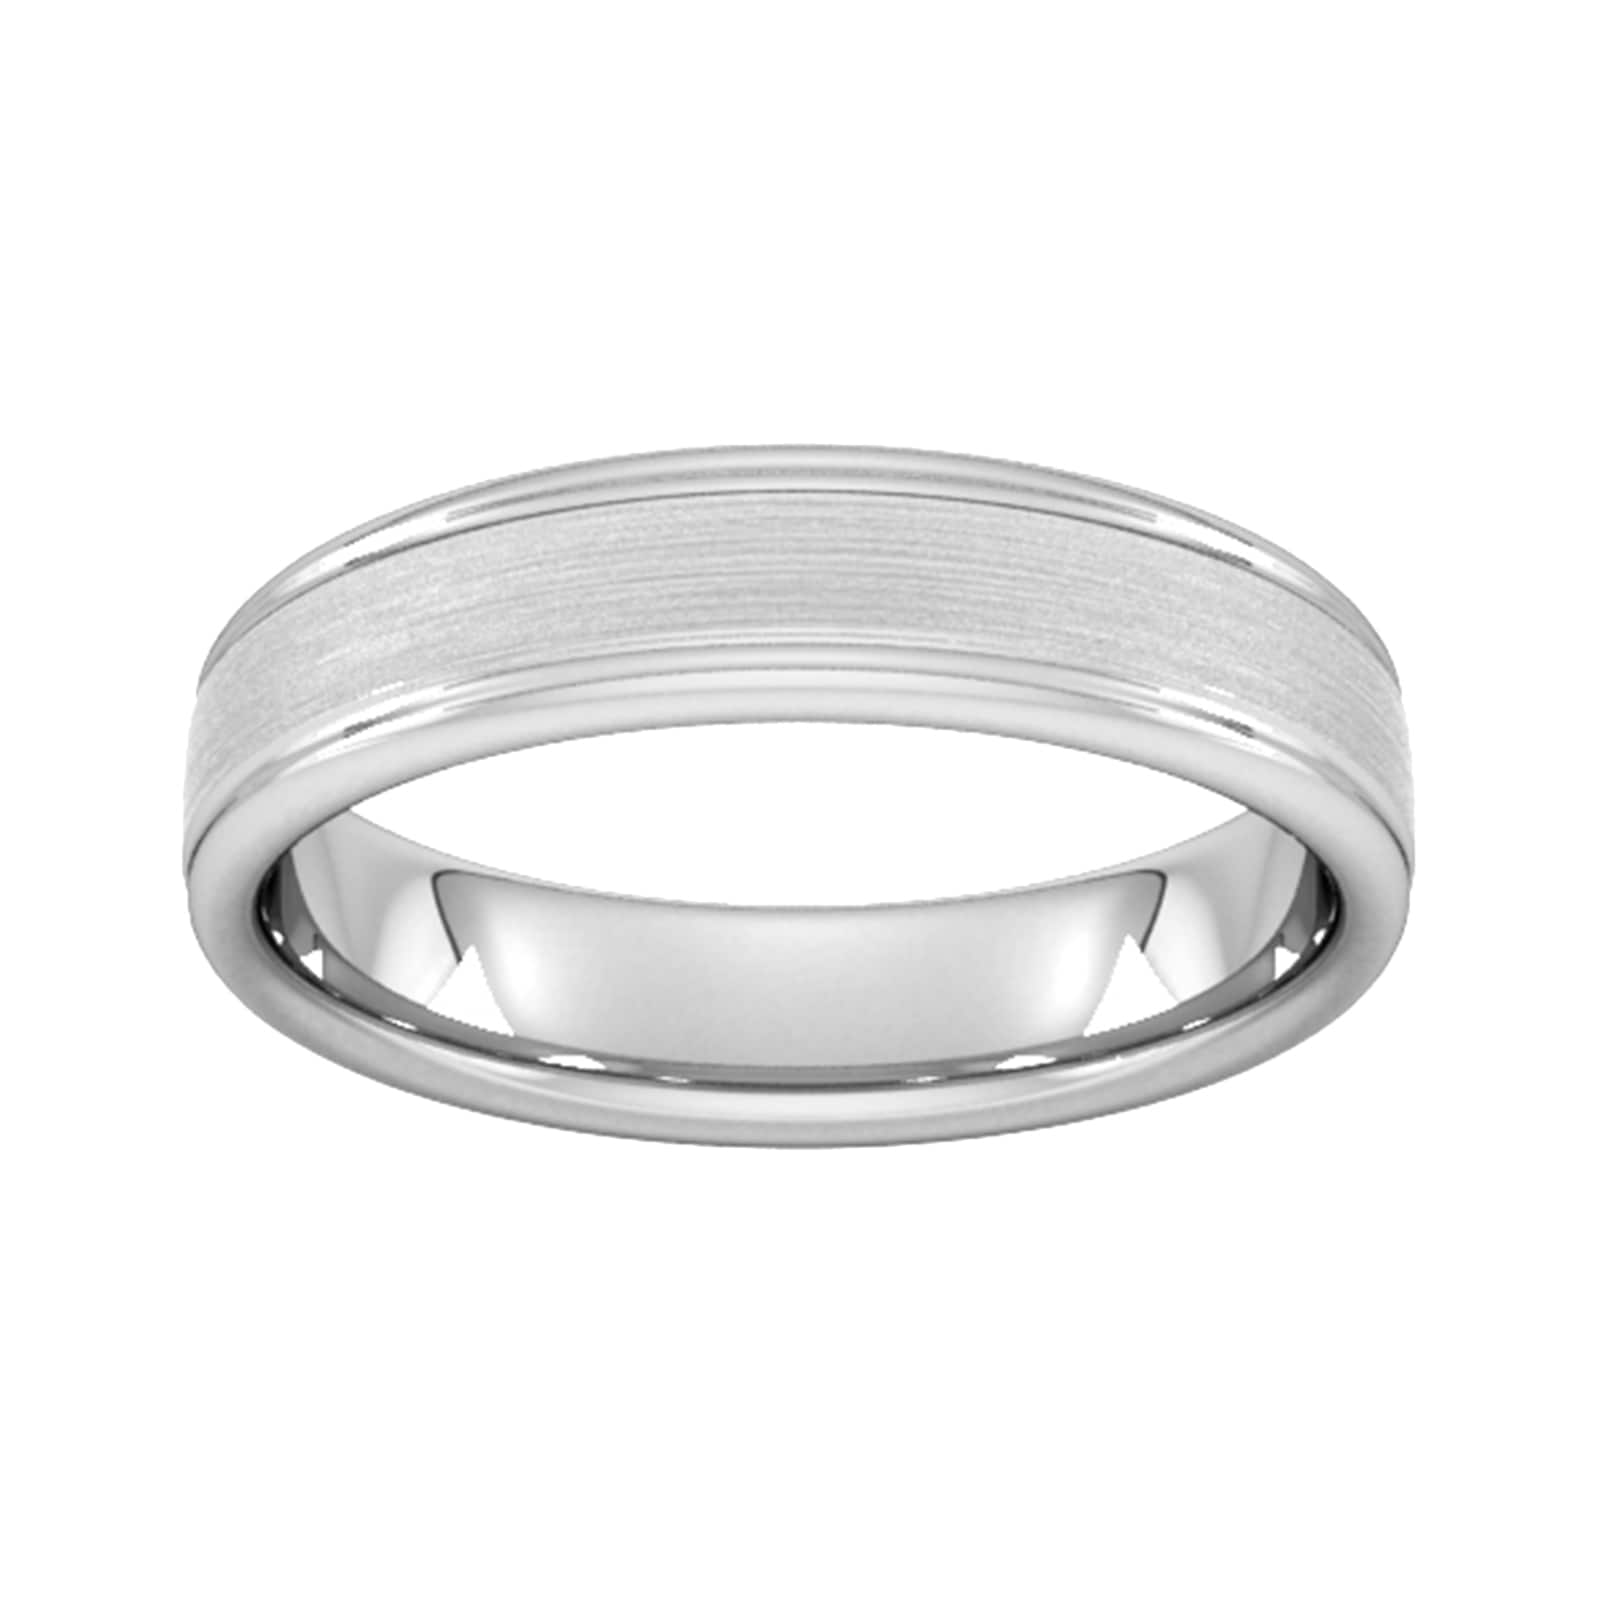 5mm Slight Court Heavy Matt Centre With Grooves Wedding Ring In 9 Carat White Gold - Ring Size Q